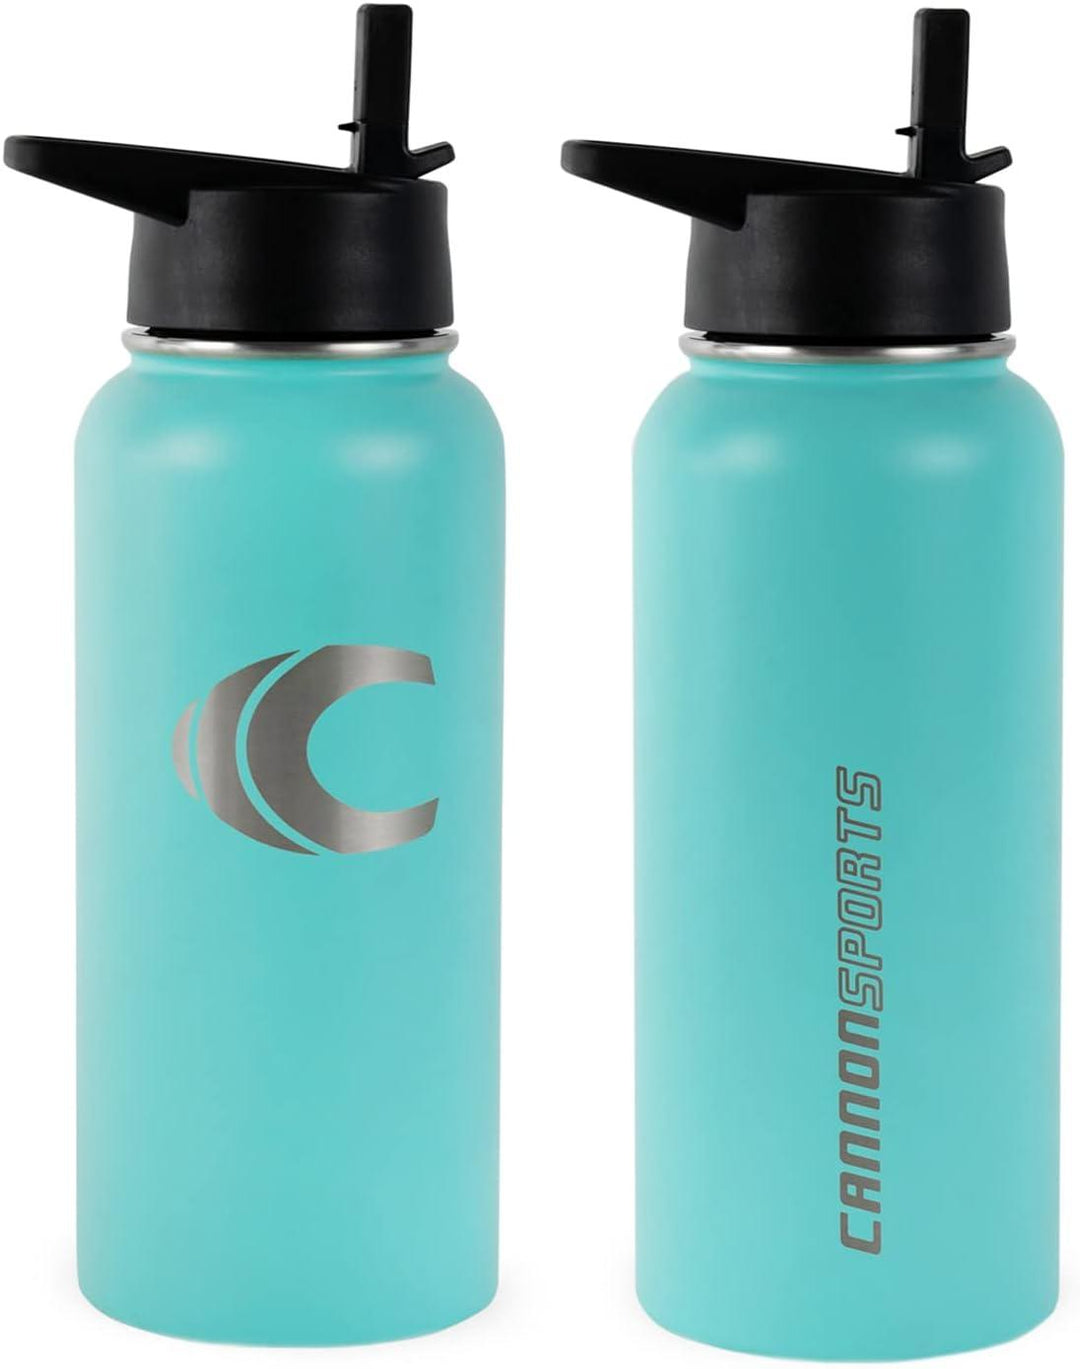 Cannon Sports Stainless Steel Triple Insulated Water Bottle, Teal - Cannon Sports